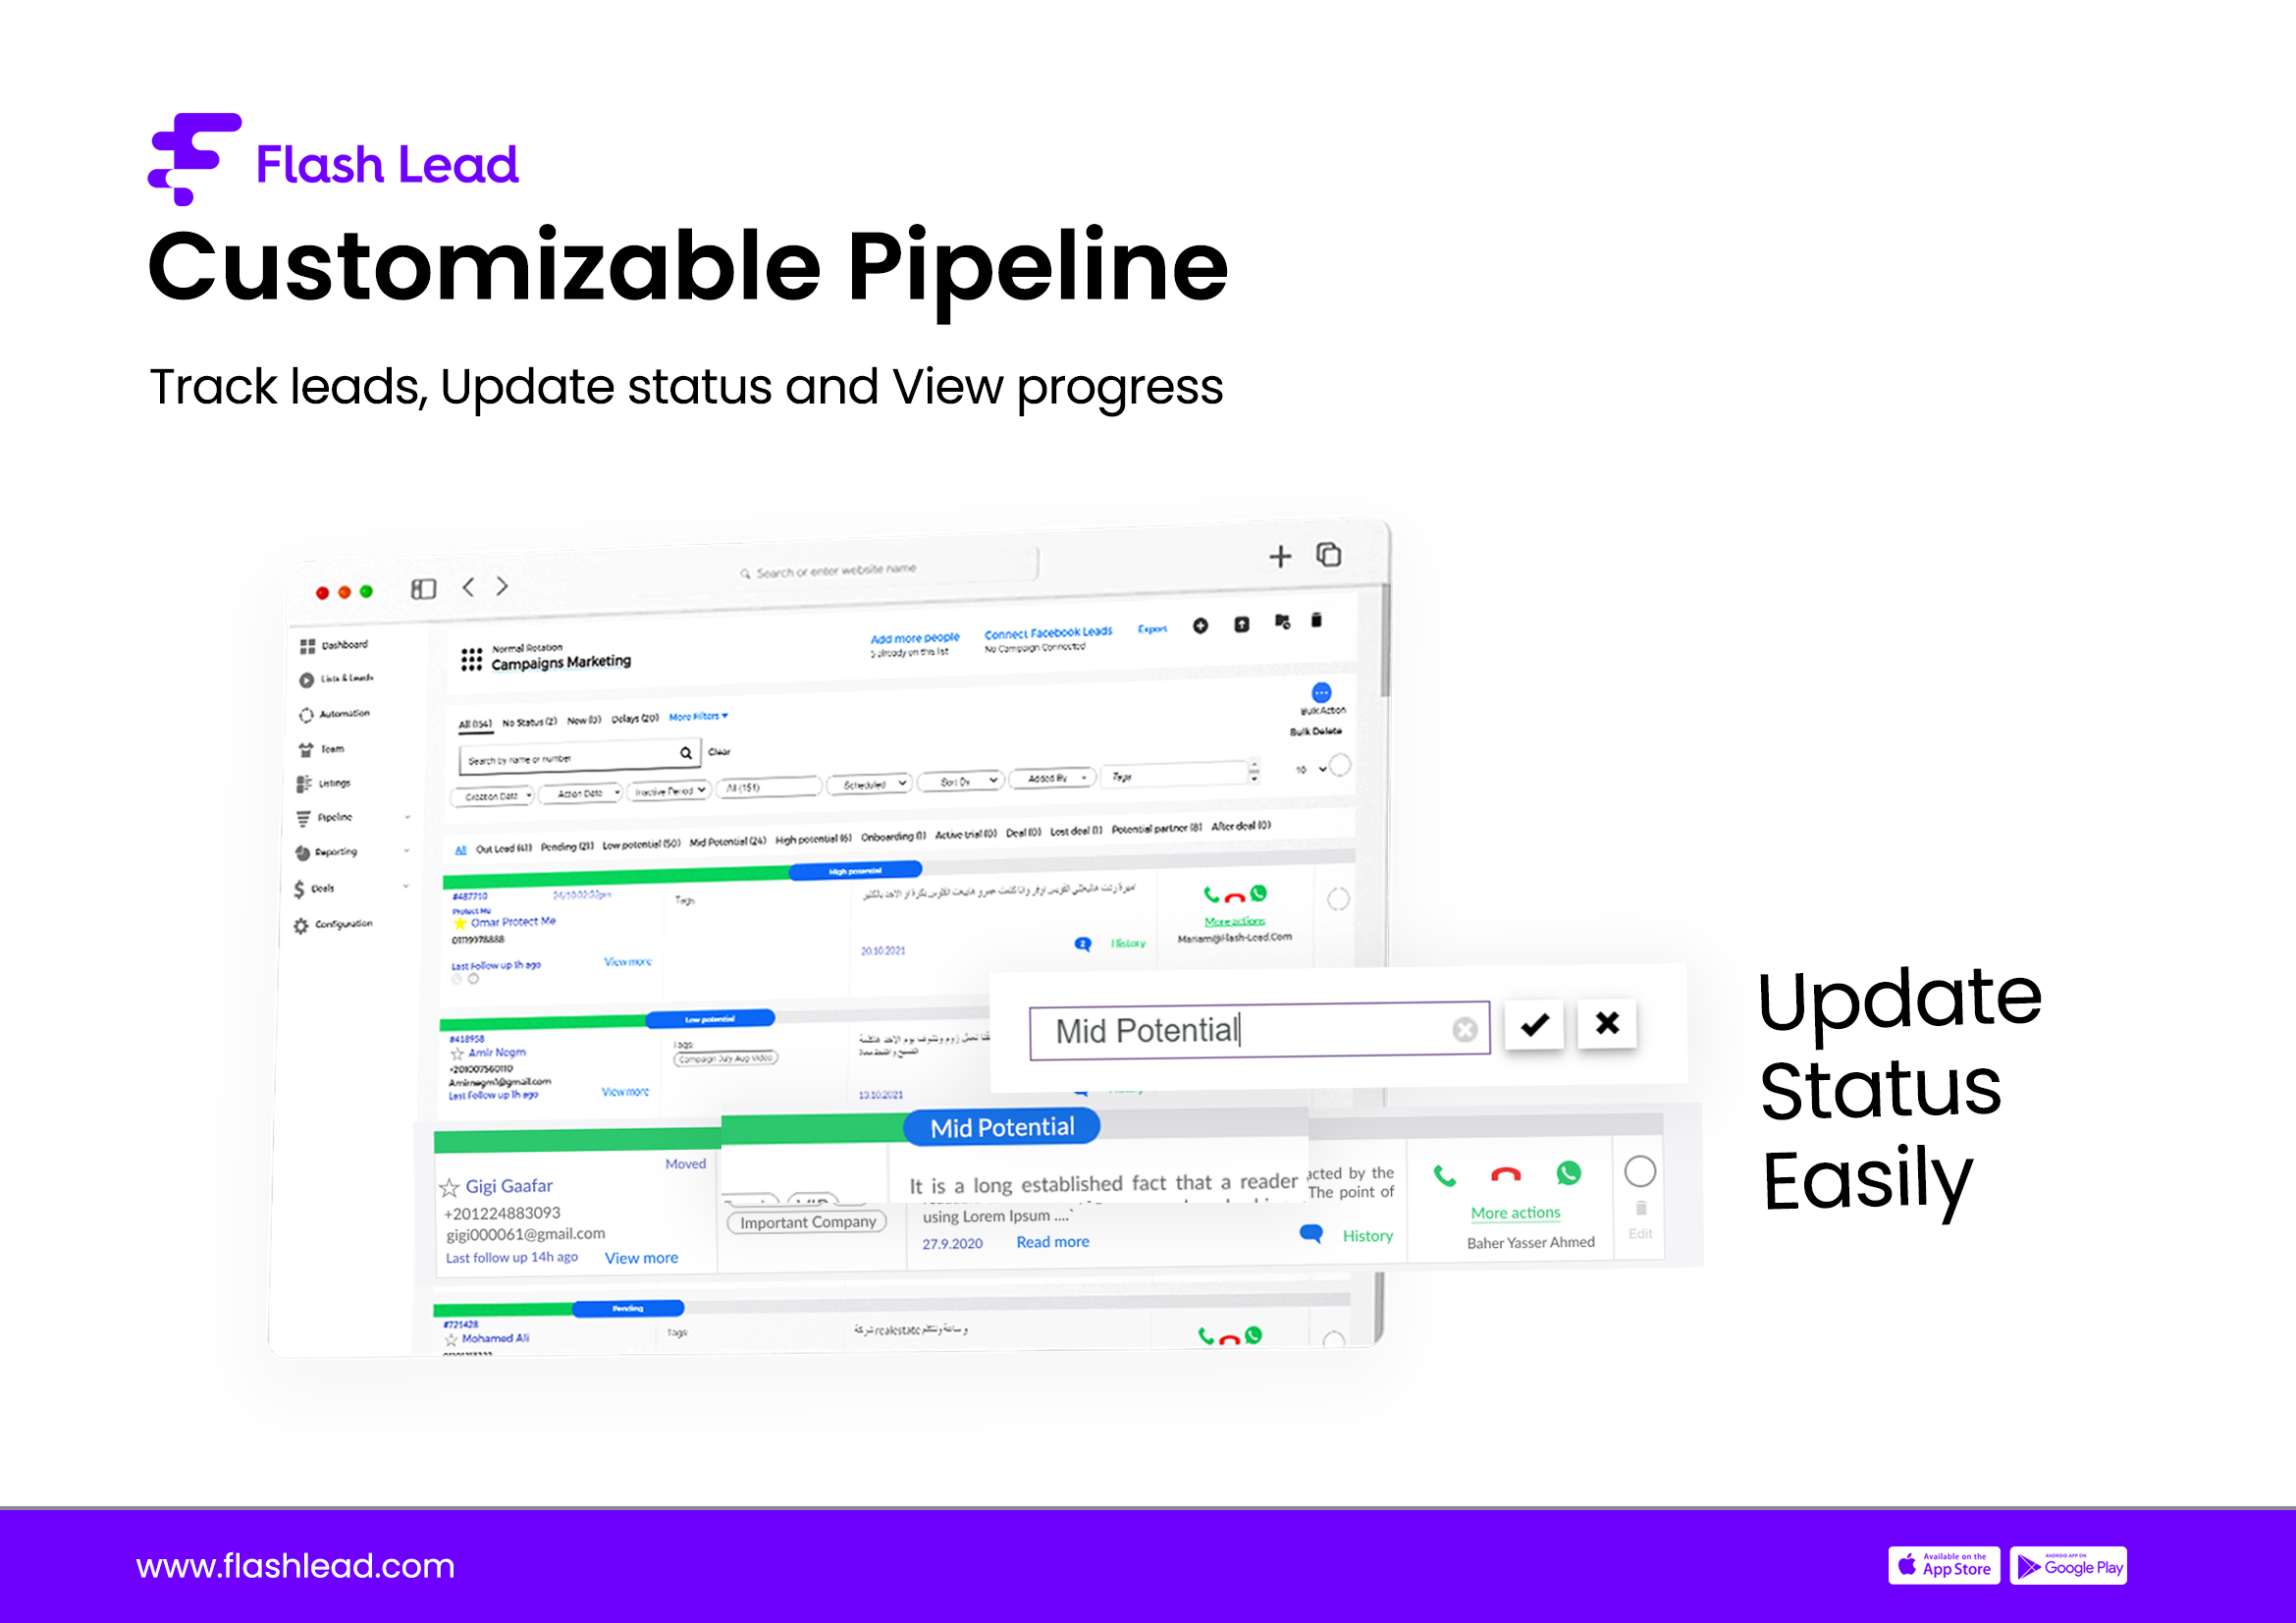 Customizable pipeline based on your client journey.